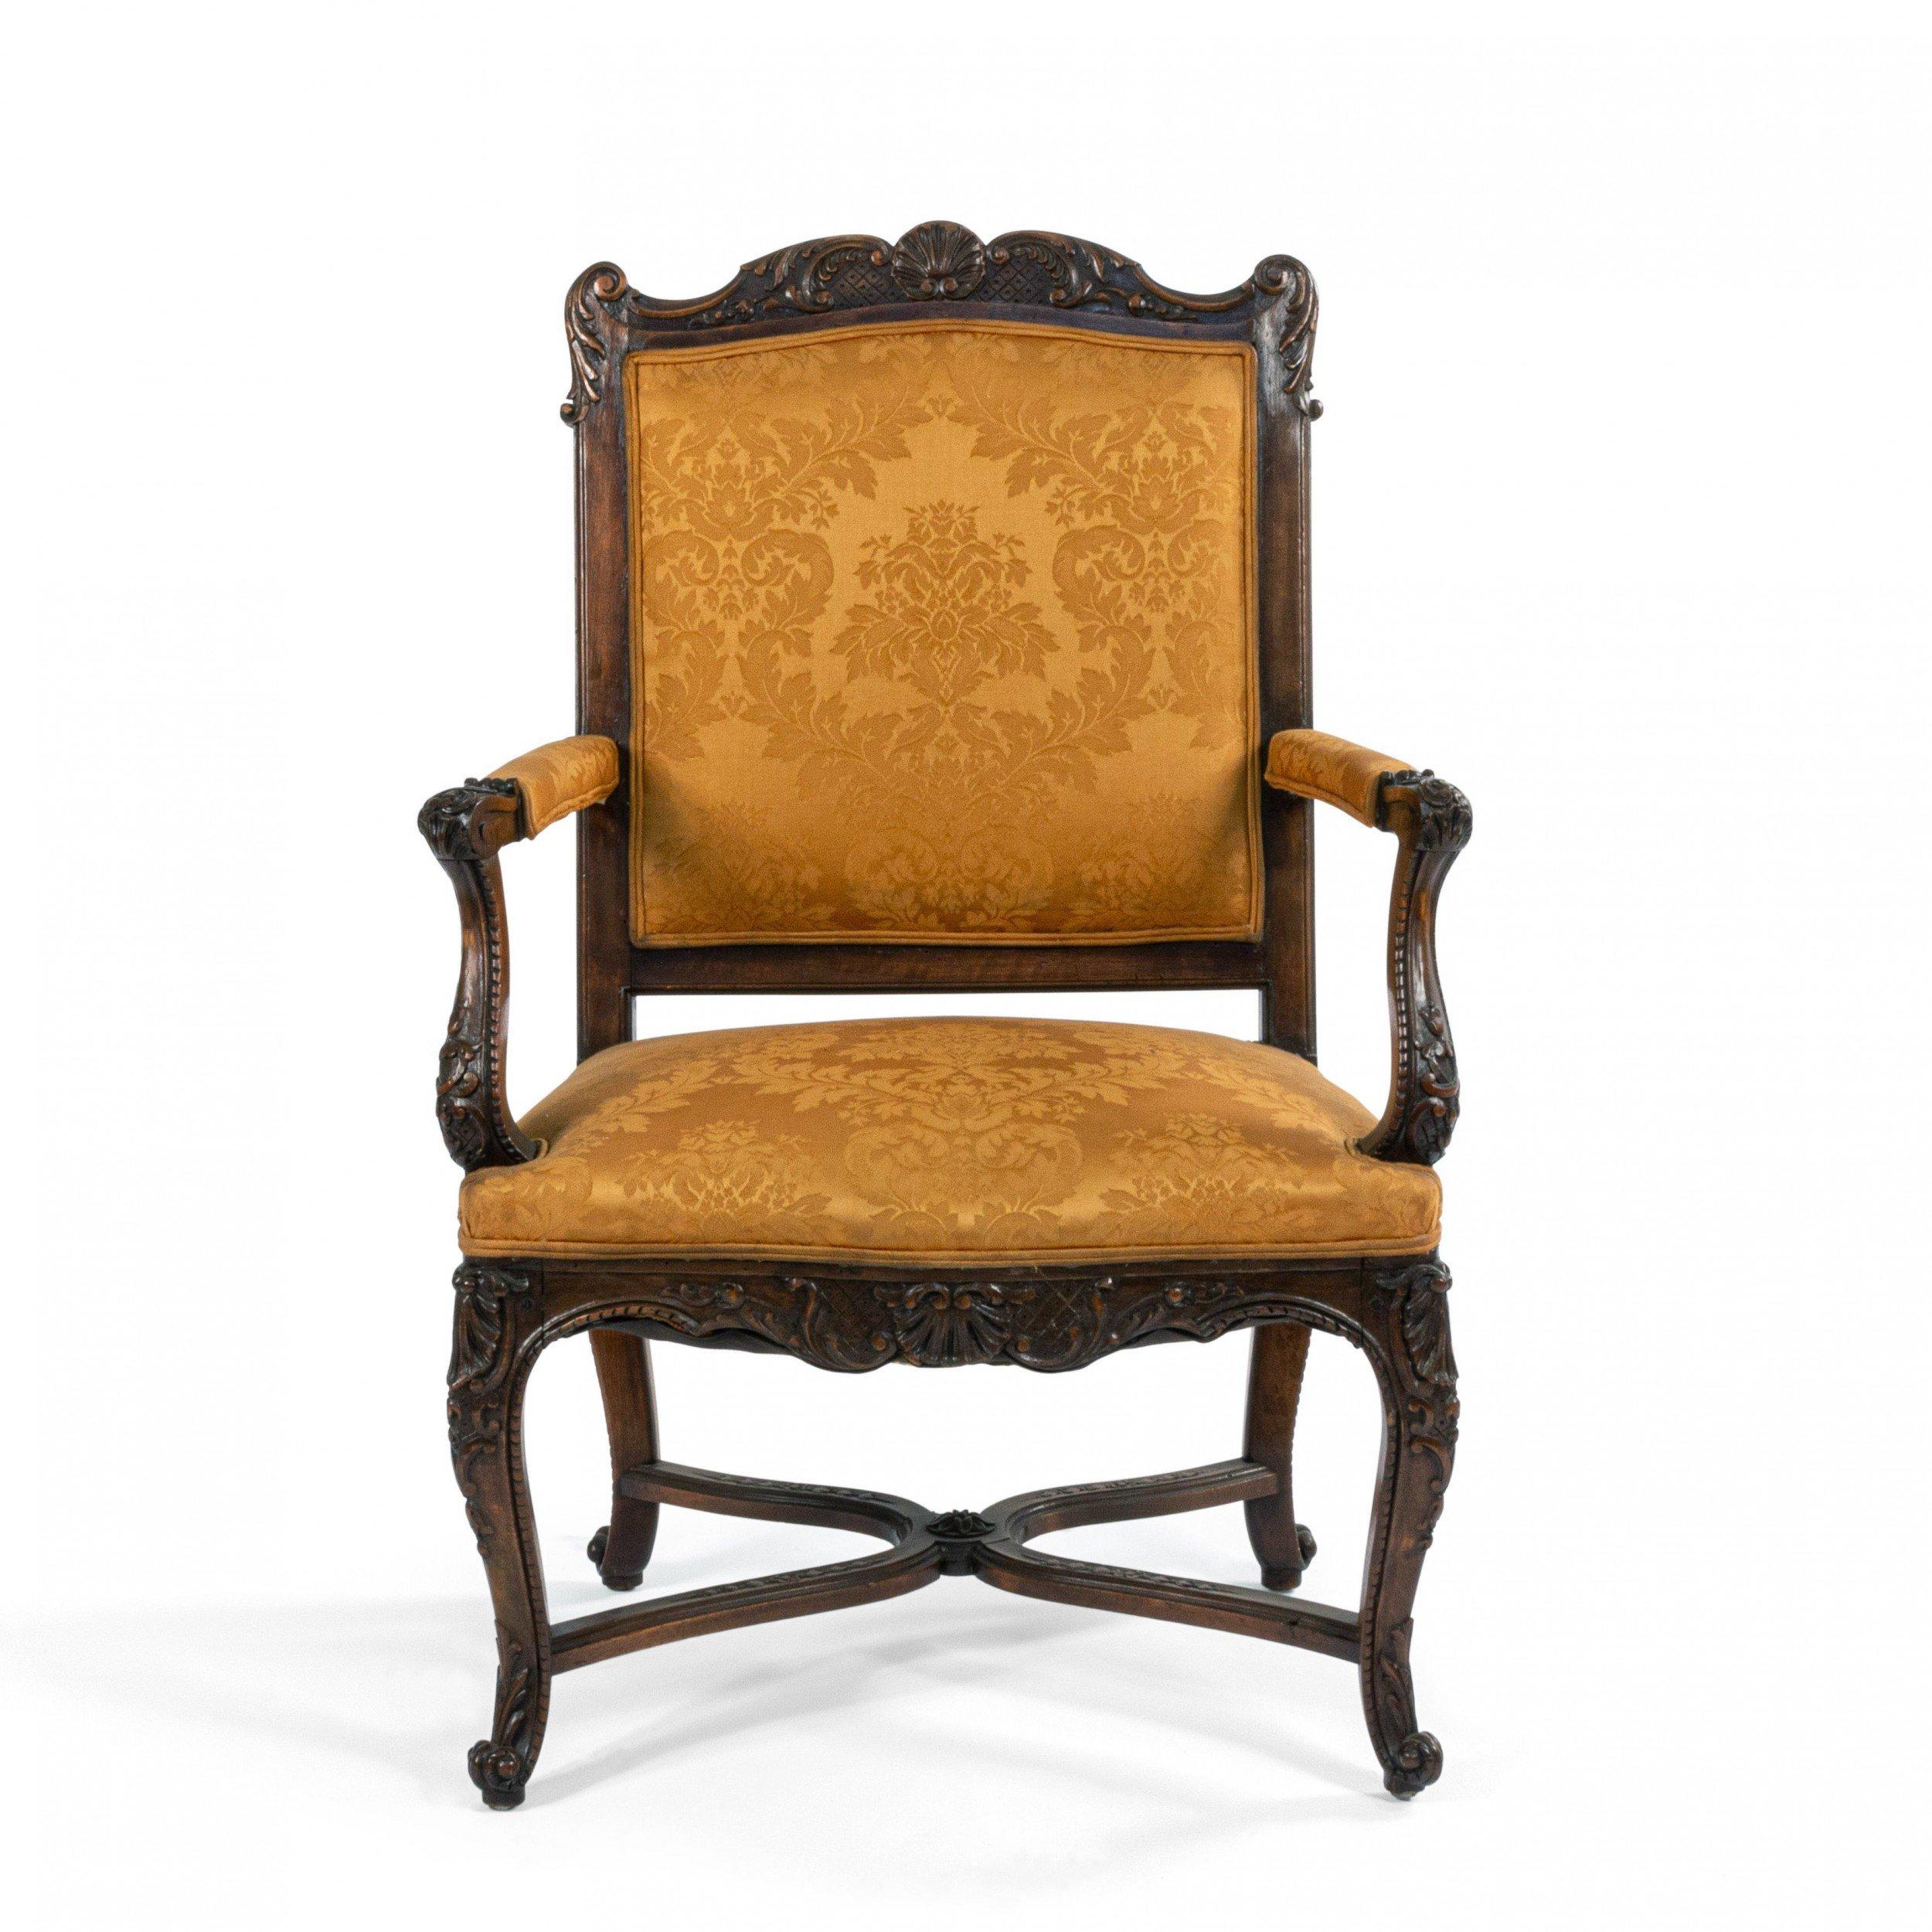 Pair of French Regence style (19th century) walnut armchairs with gold upholstery.